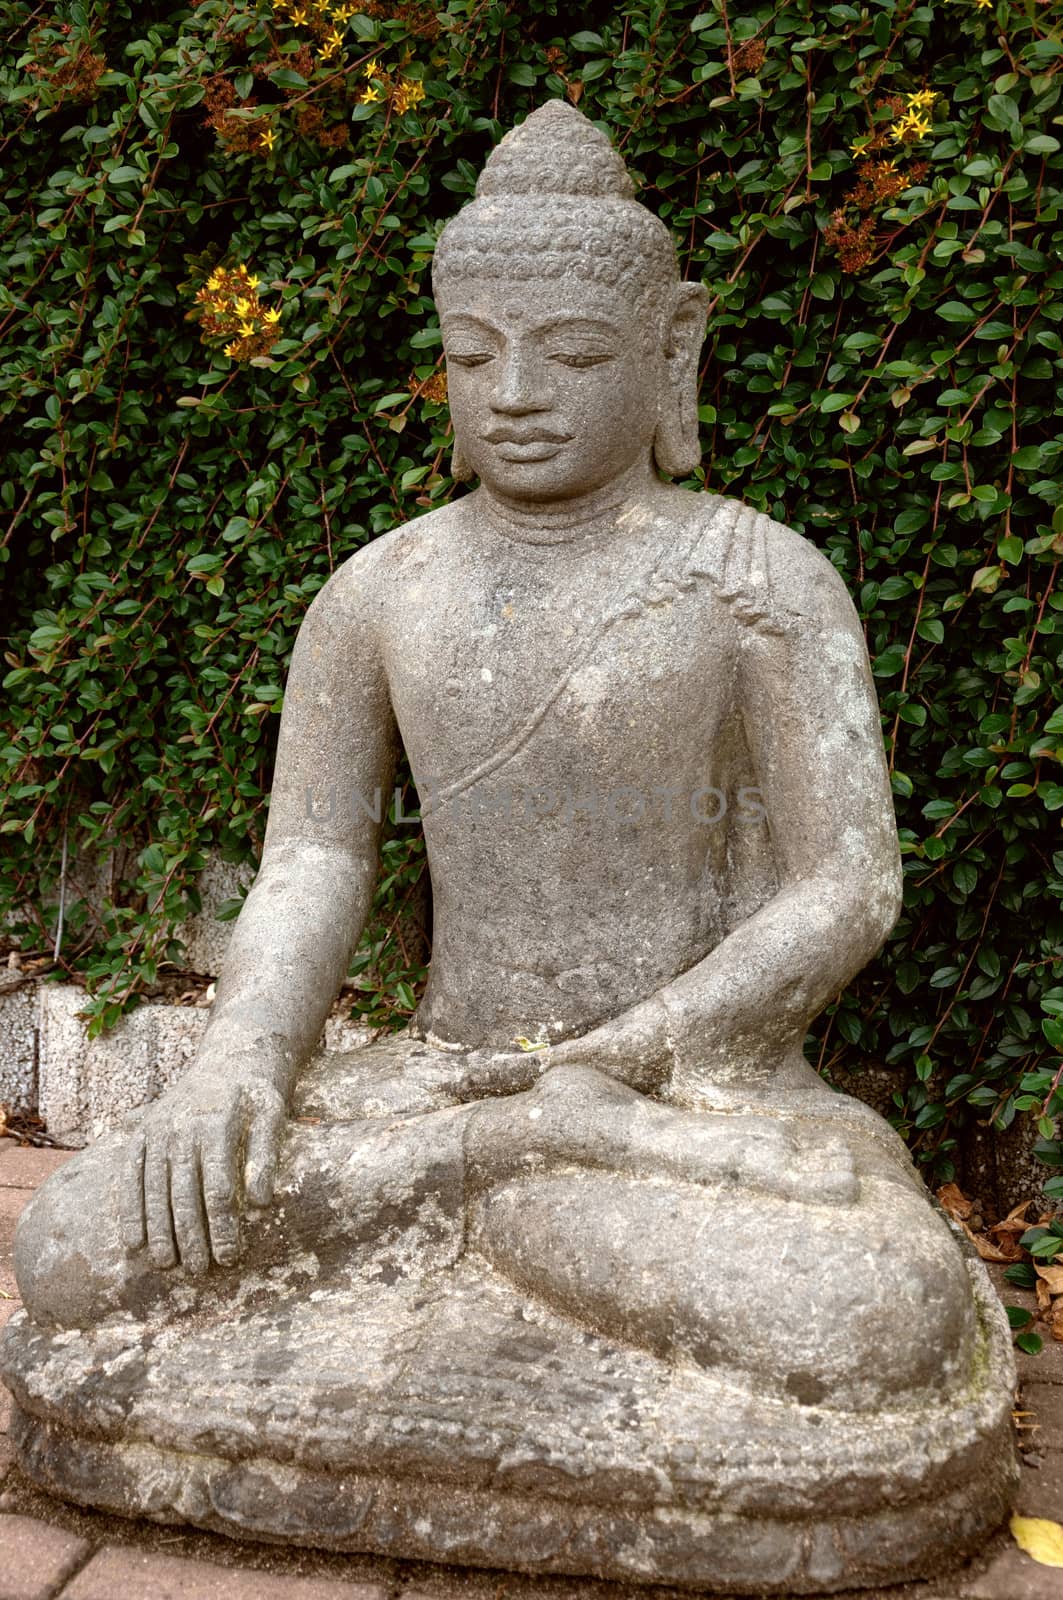 Stone Buddha sitting in lotus position in the garden.